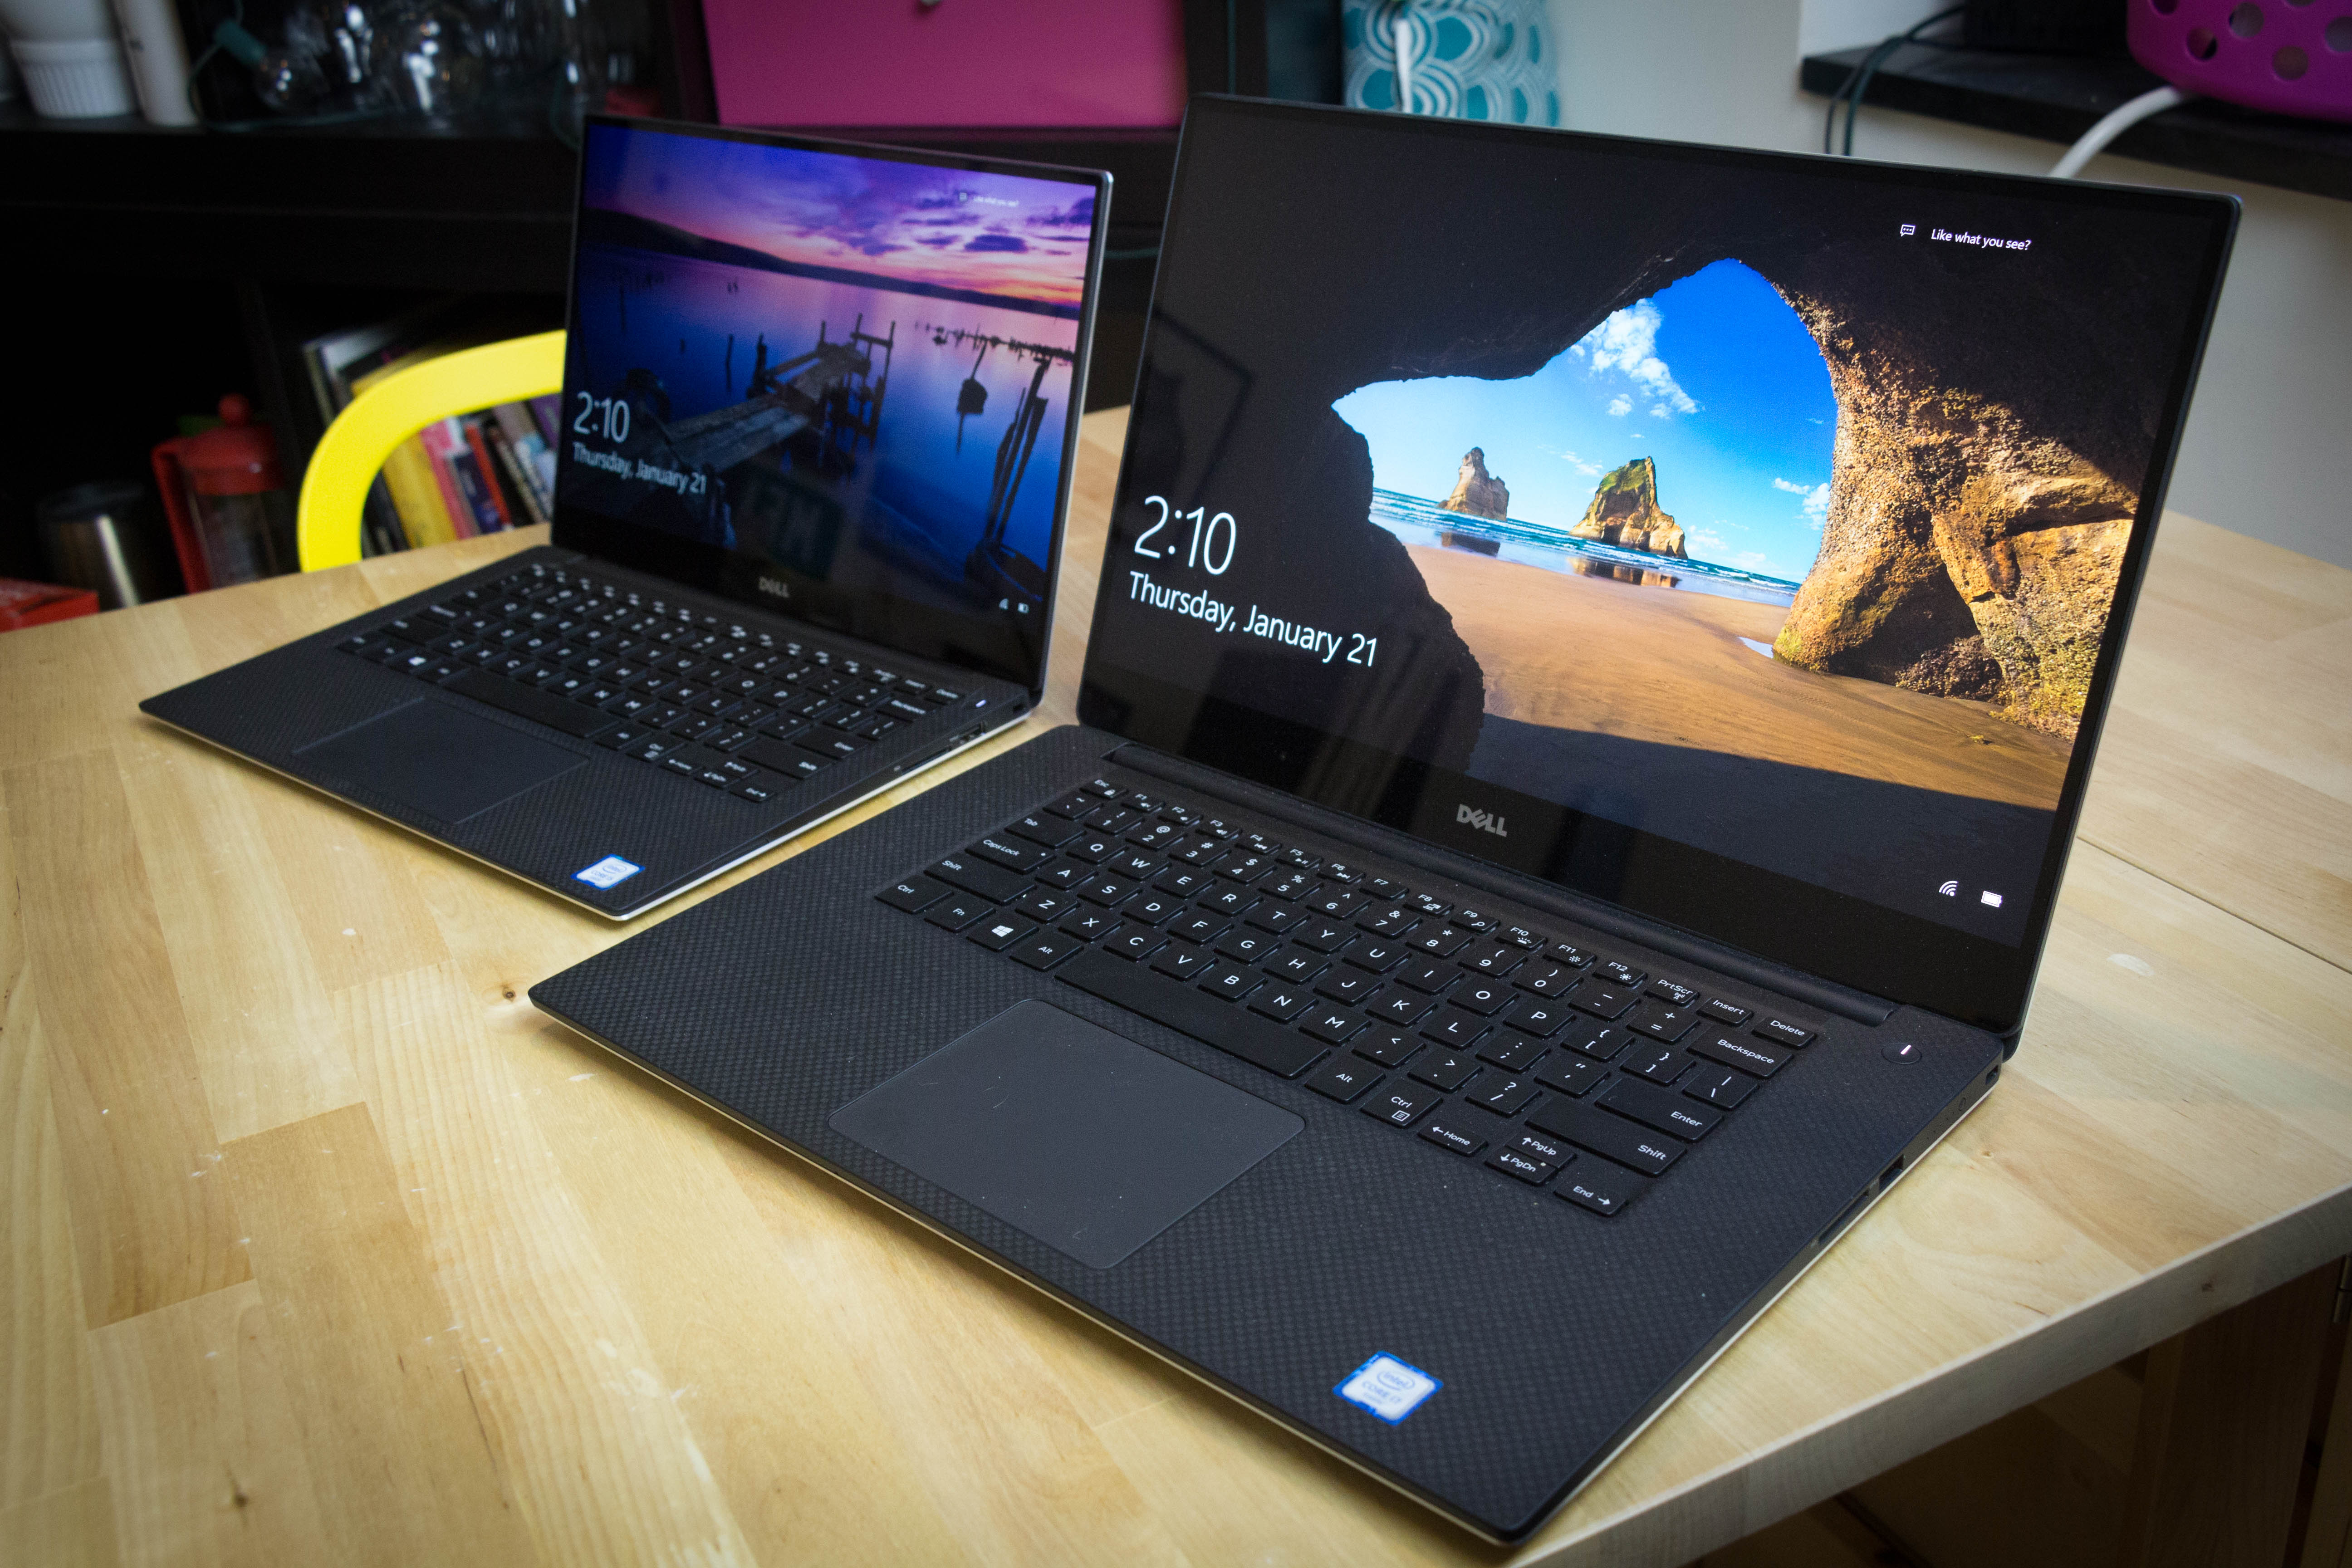 Dell XPS 15 review: A bigger version of the best PC laptop